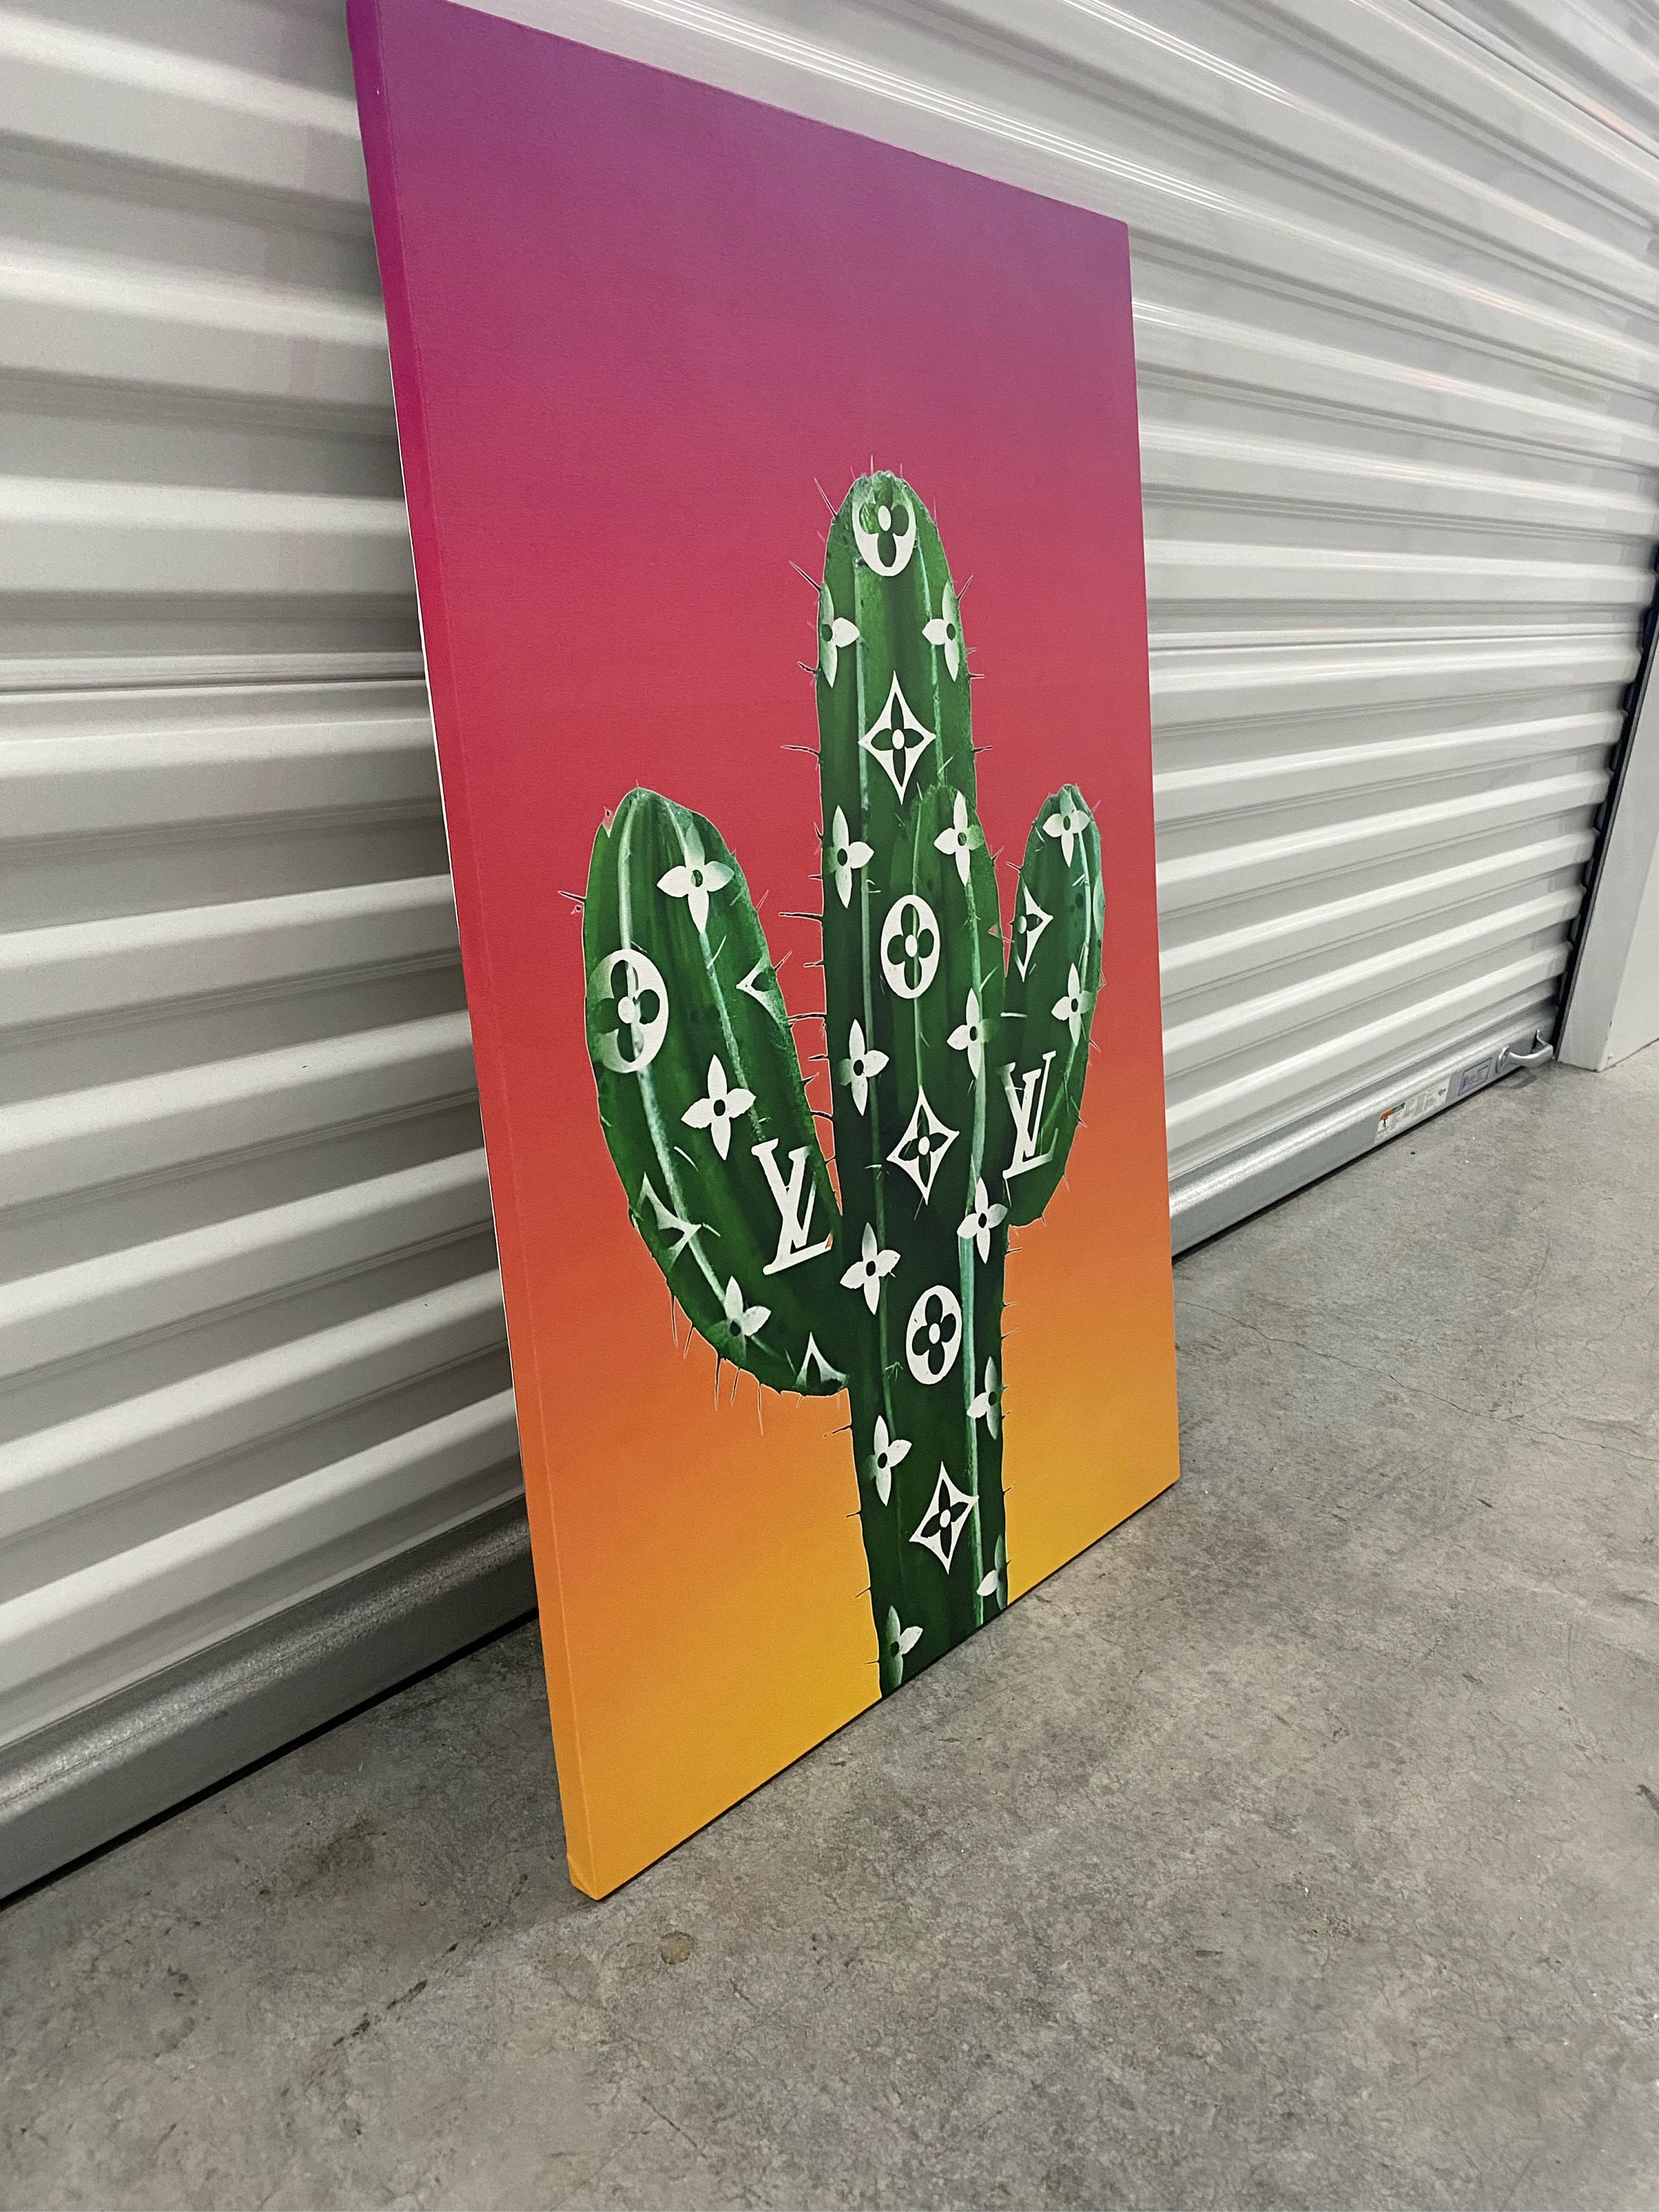 A surrealist painting of a louis vuitton bag made of cactus